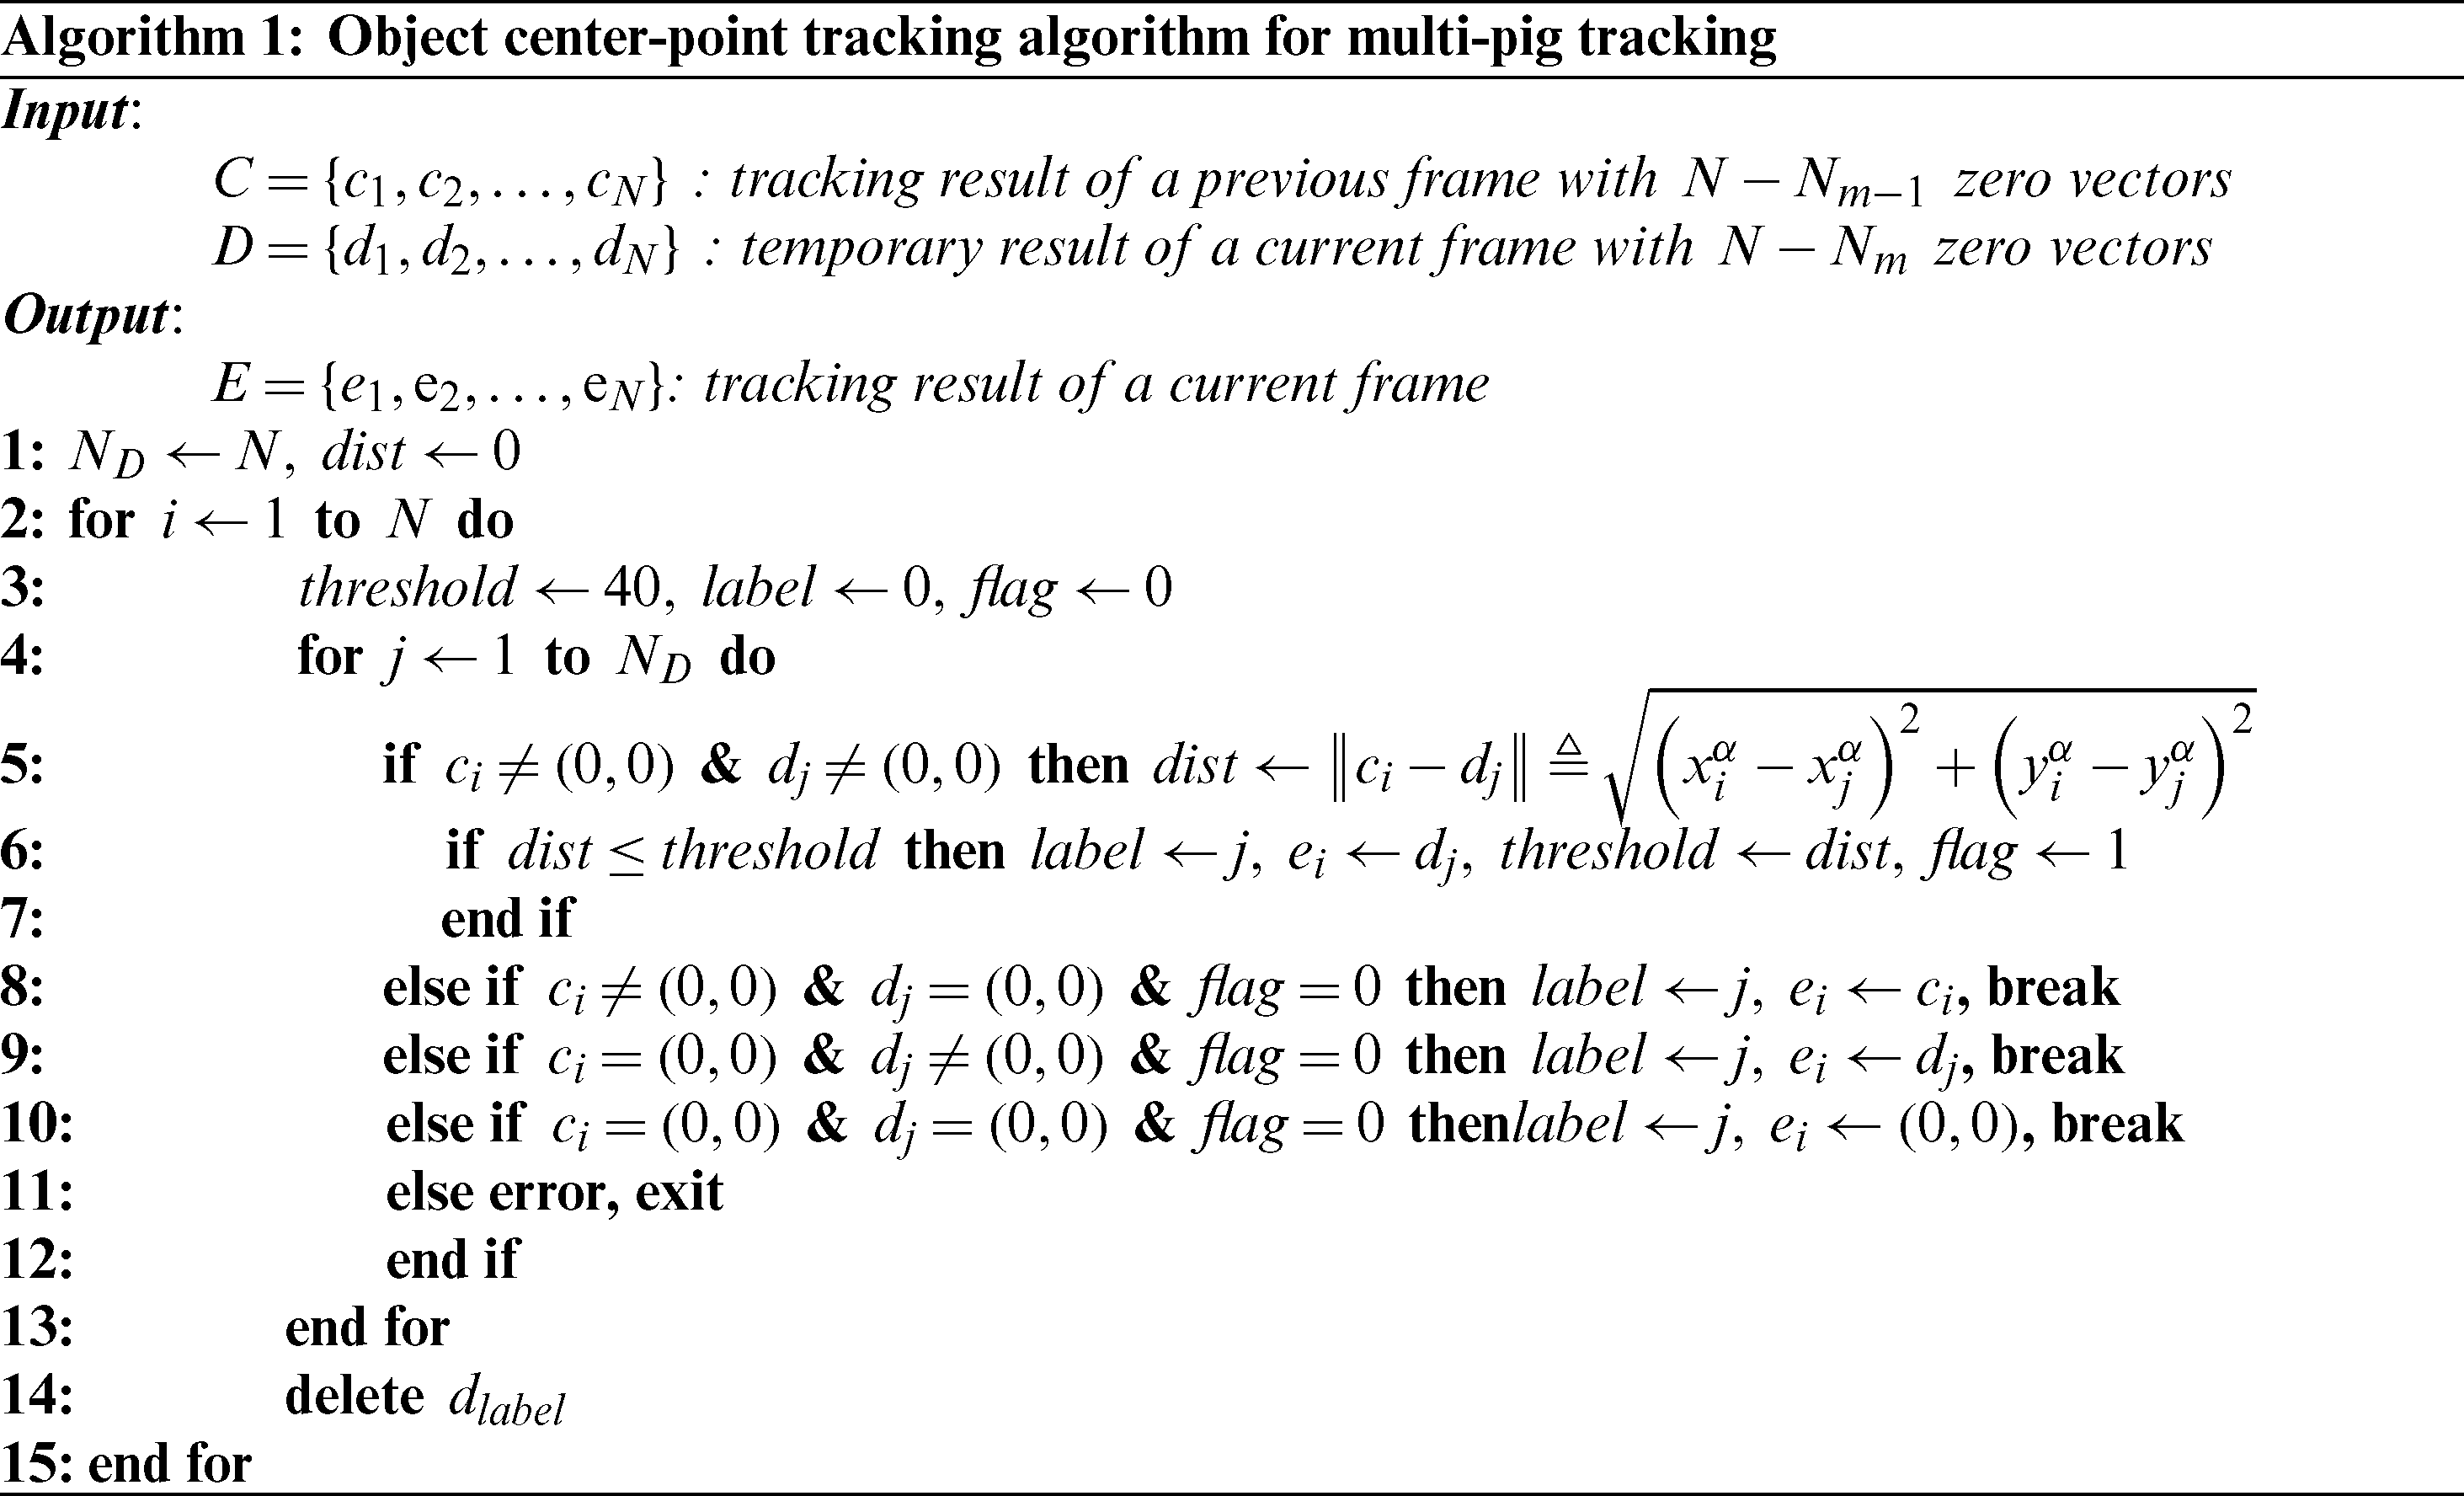 Computers Materials Continua Doi 10 Cmc 21 Images Article An Aiot Monitoring System For Multi Object Tracking And Alerting Wonseok Jung1 Se Han Kim2 Seng Phil Hong3 And Jeongwook Seo4 1korea Electronics Technology